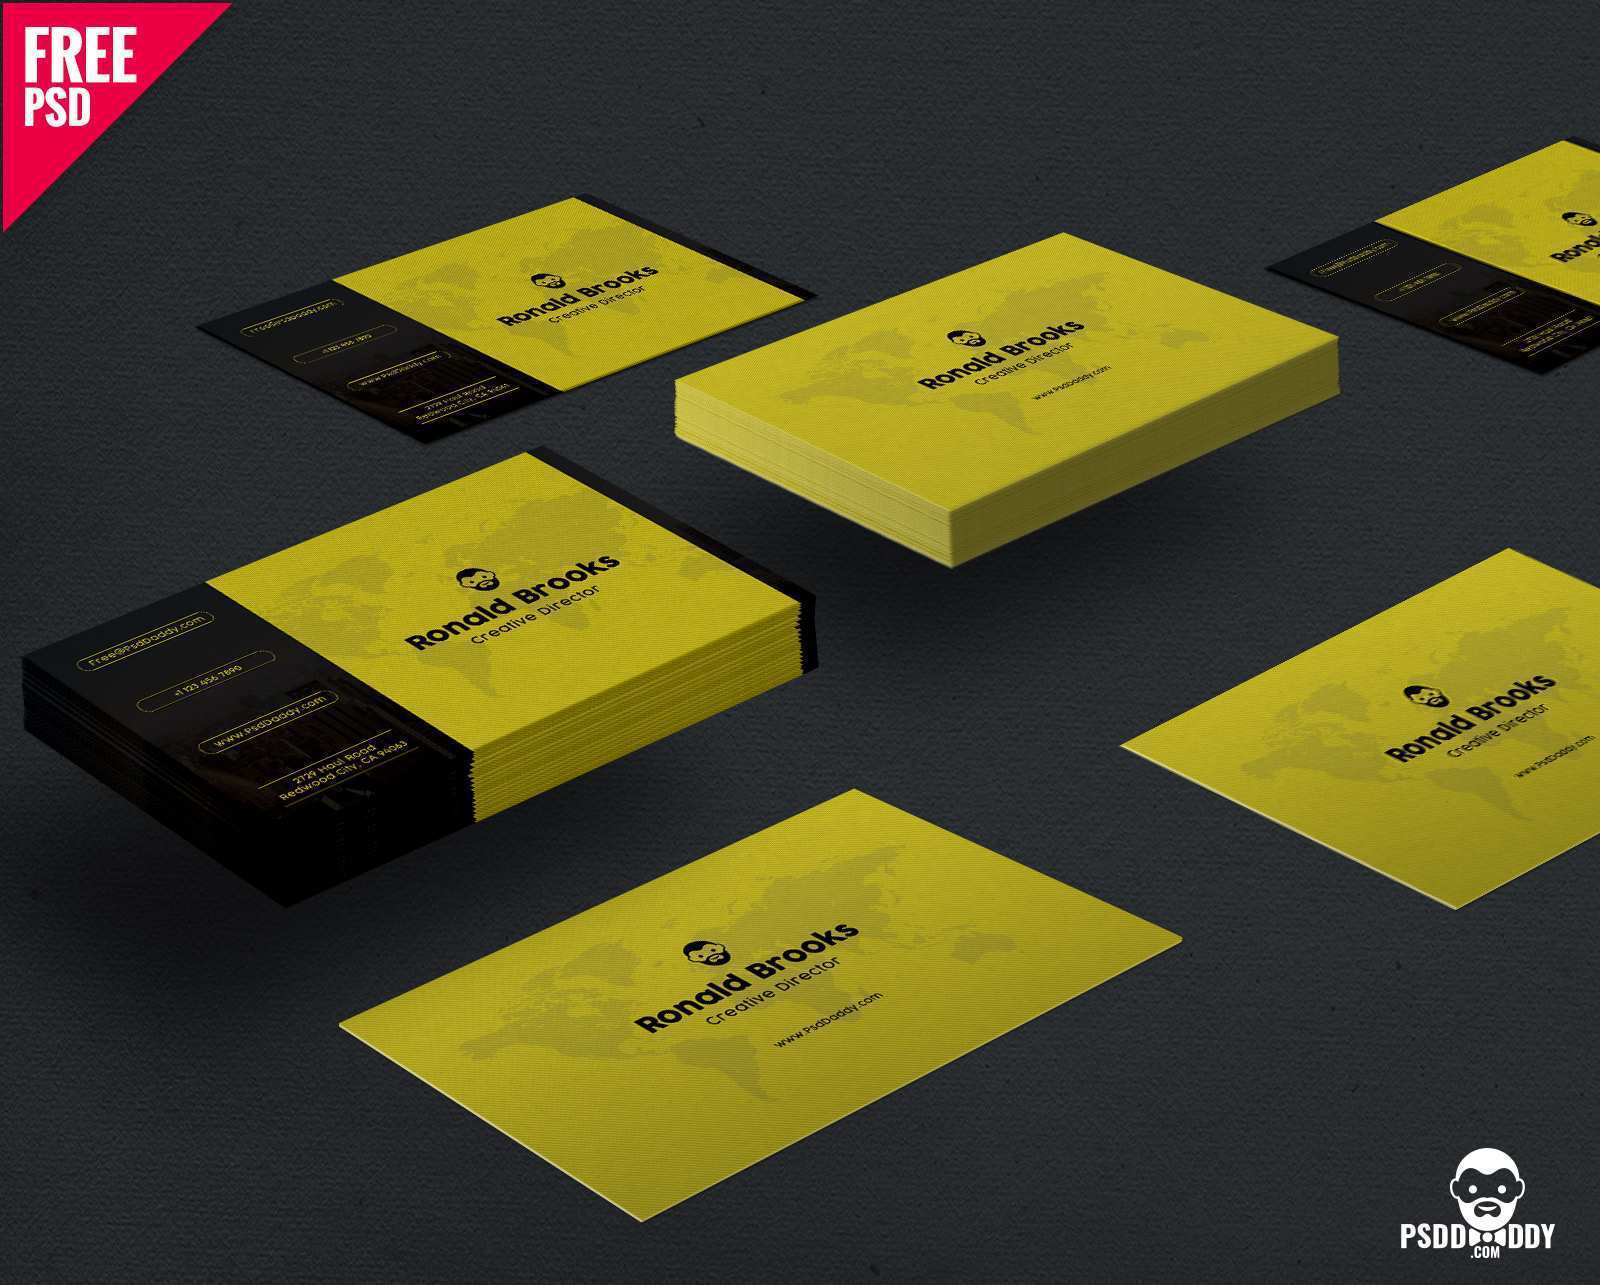 13 Standard Business Card Template Free Download Pdf With Stunning Design with Business Card Template Free Download Pdf